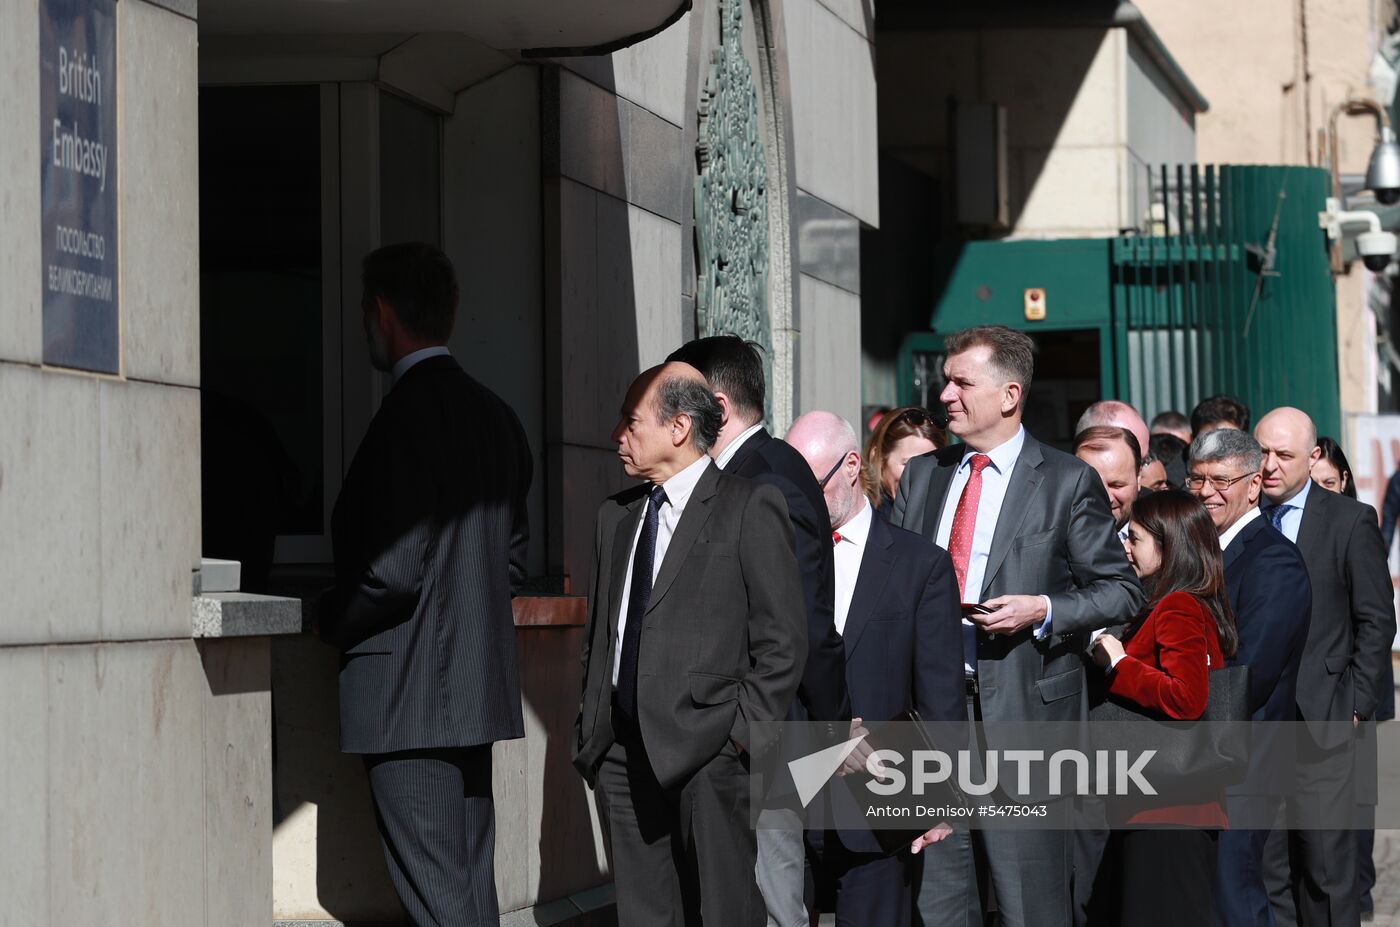 Foreign diplomats arrive at UK Embassy